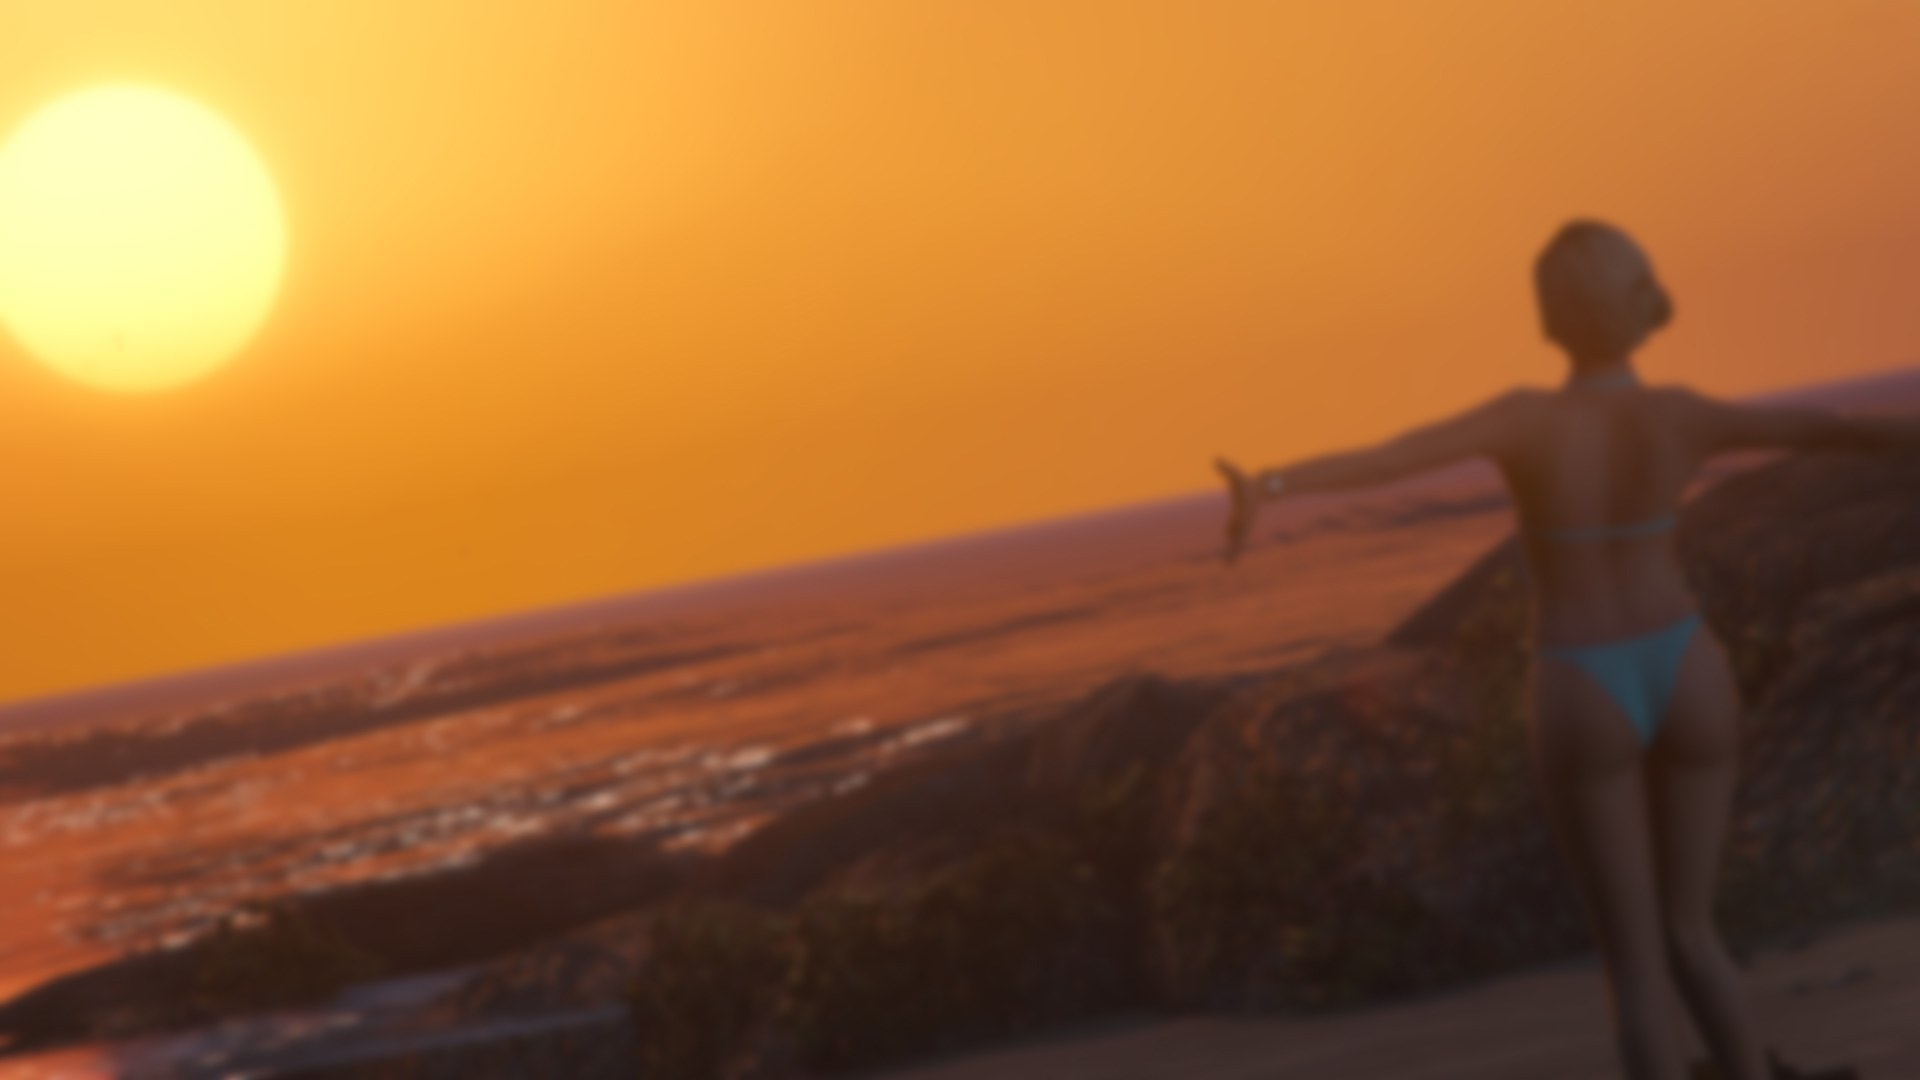 Wallpaper, Core Roleplay, Grand Theft Auto, Grand Theft Auto V, roleplaying, FiveM, sunset 1920x1080